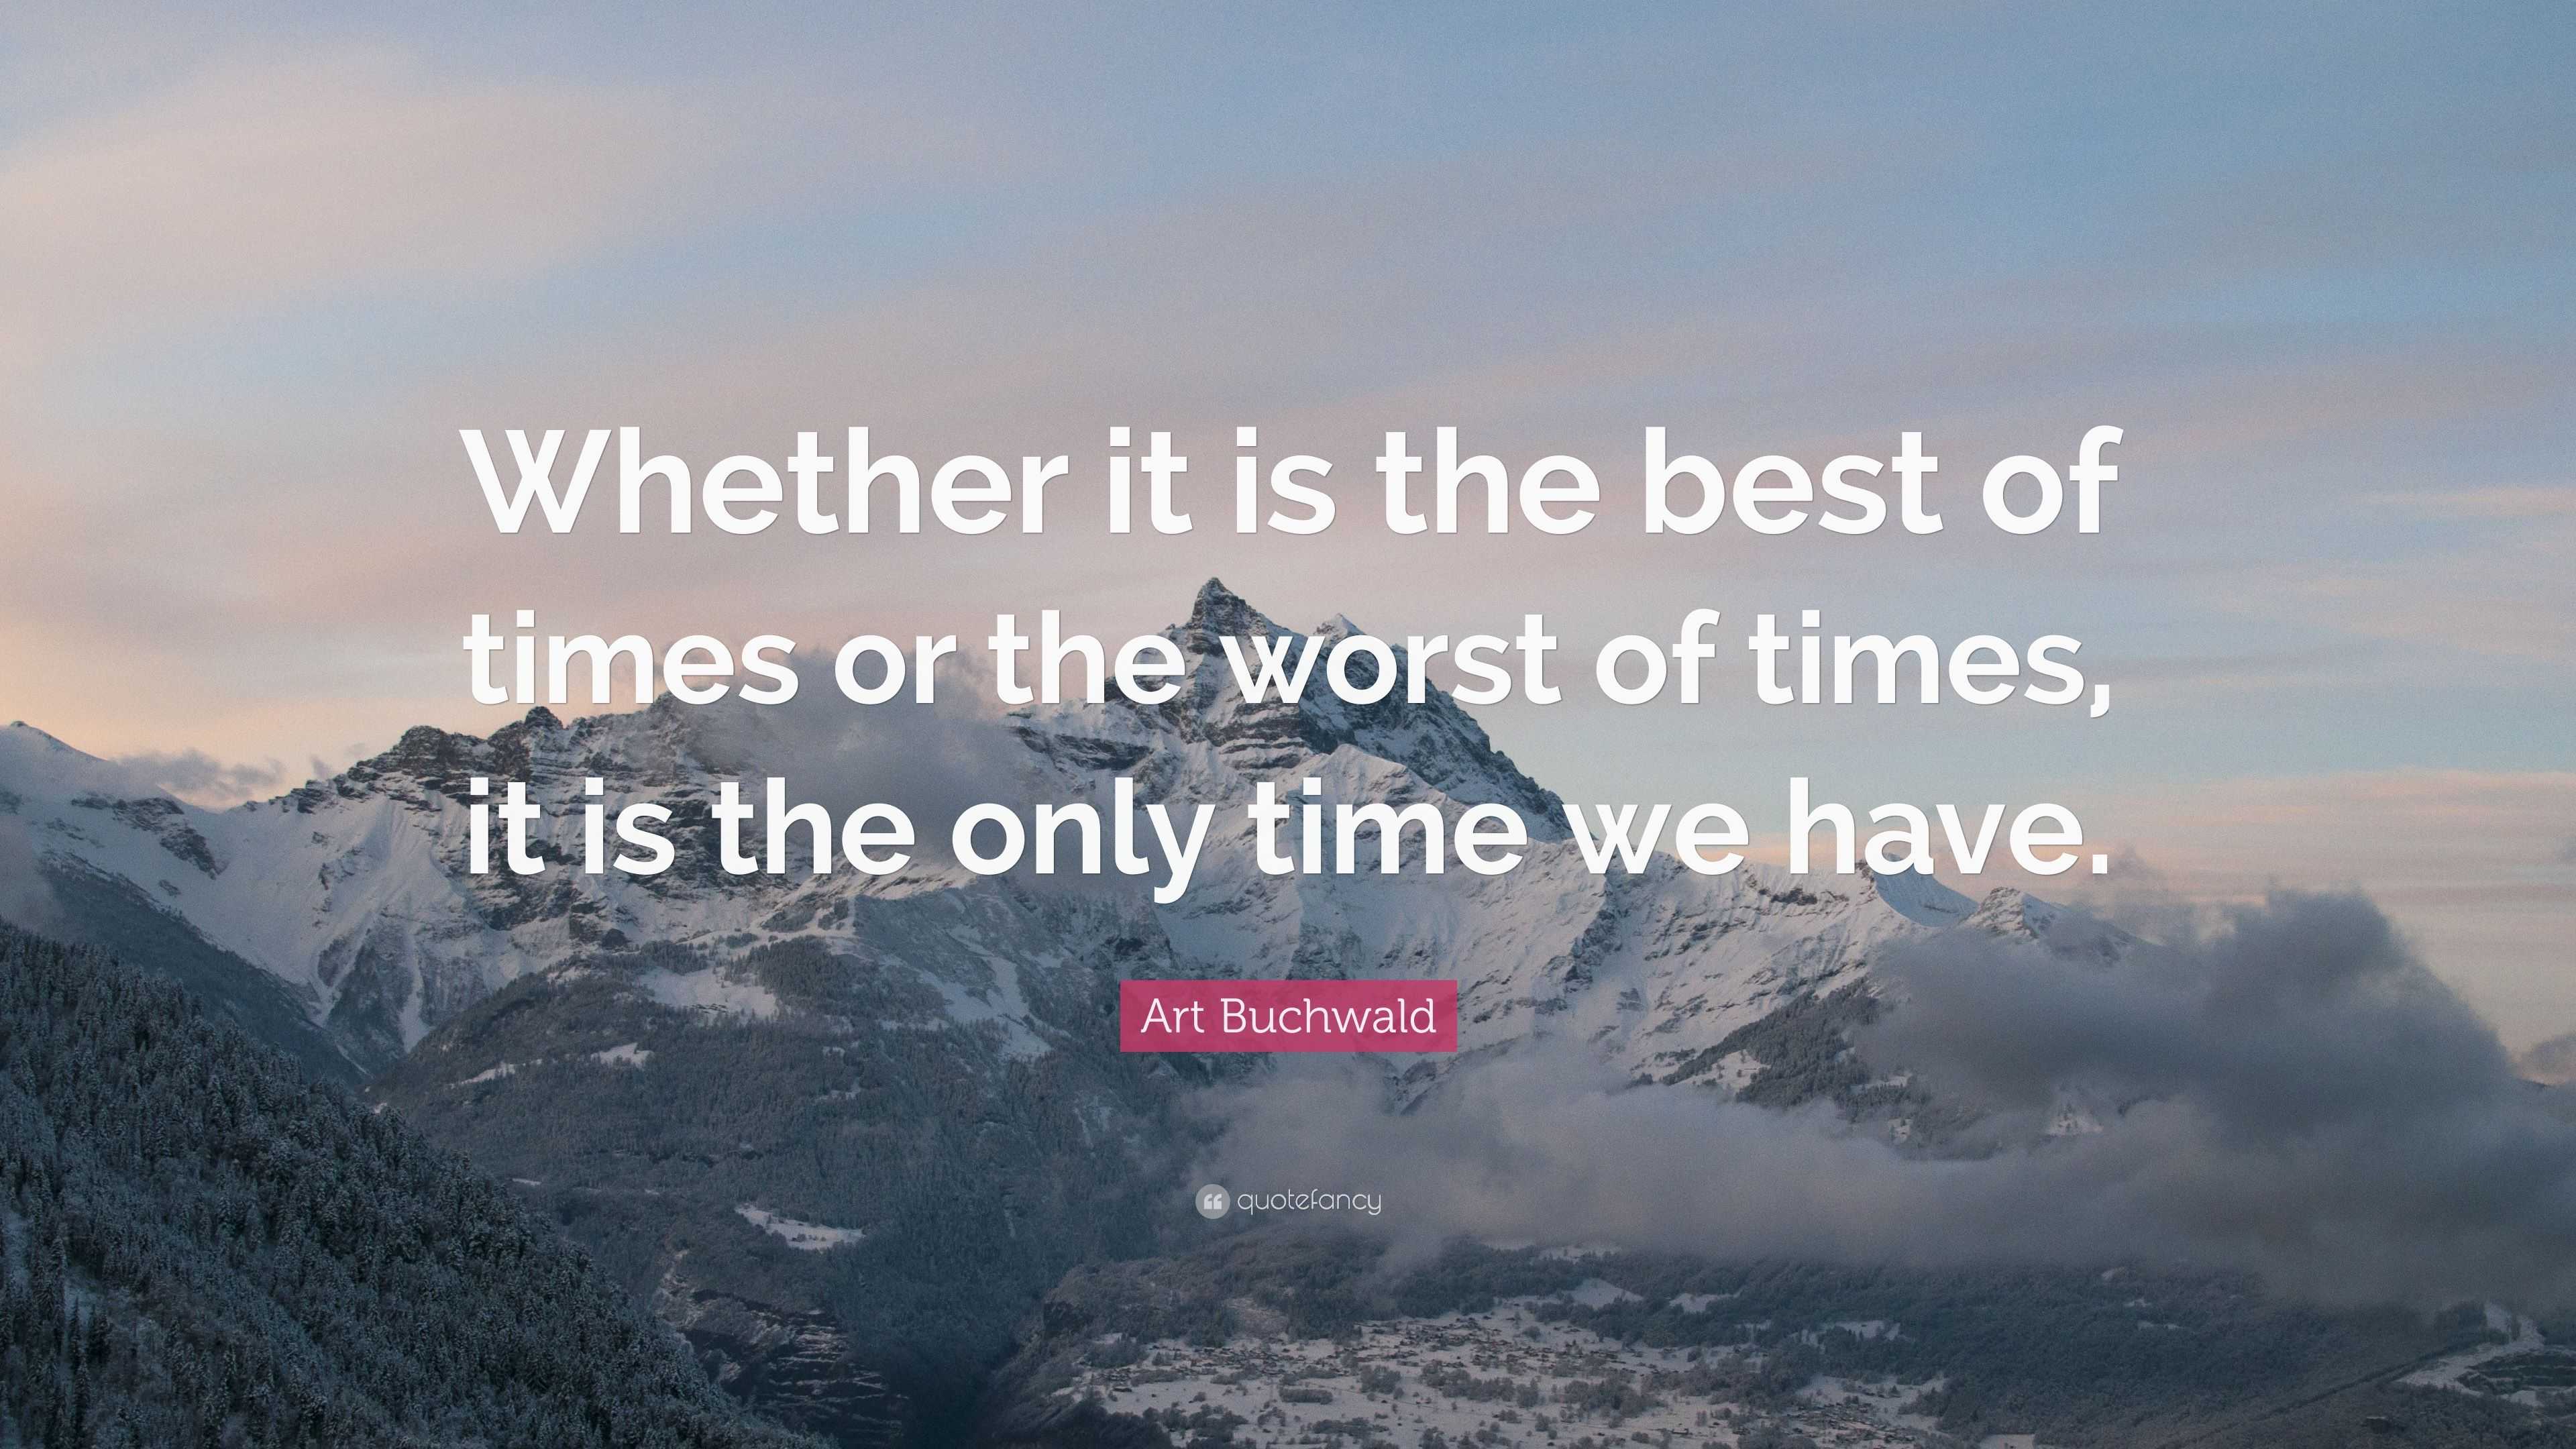 Art Buchwald Quote: “Whether it is the best of times or the worst of ...